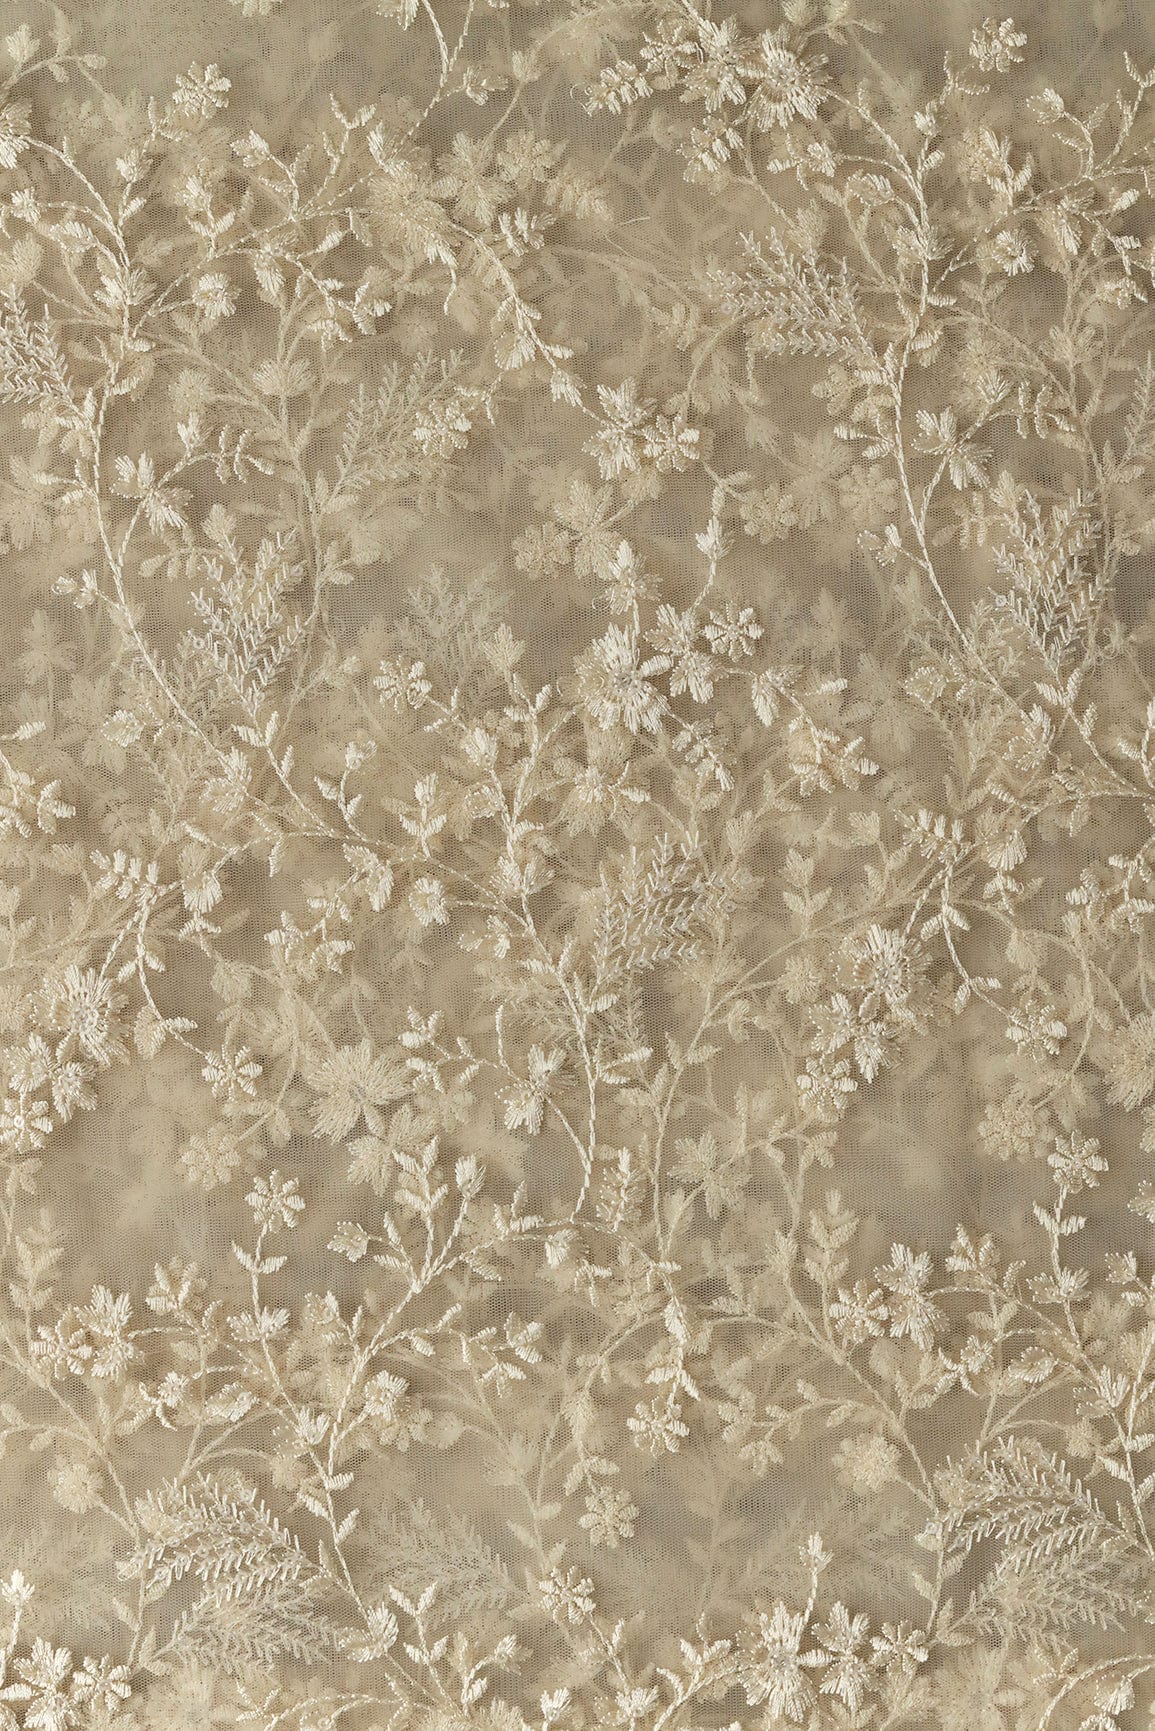 doeraa Embroidery Fabrics Beige Thread With Sequins Beautiful Floral Embroidery Work On Beige Soft Net Fabric